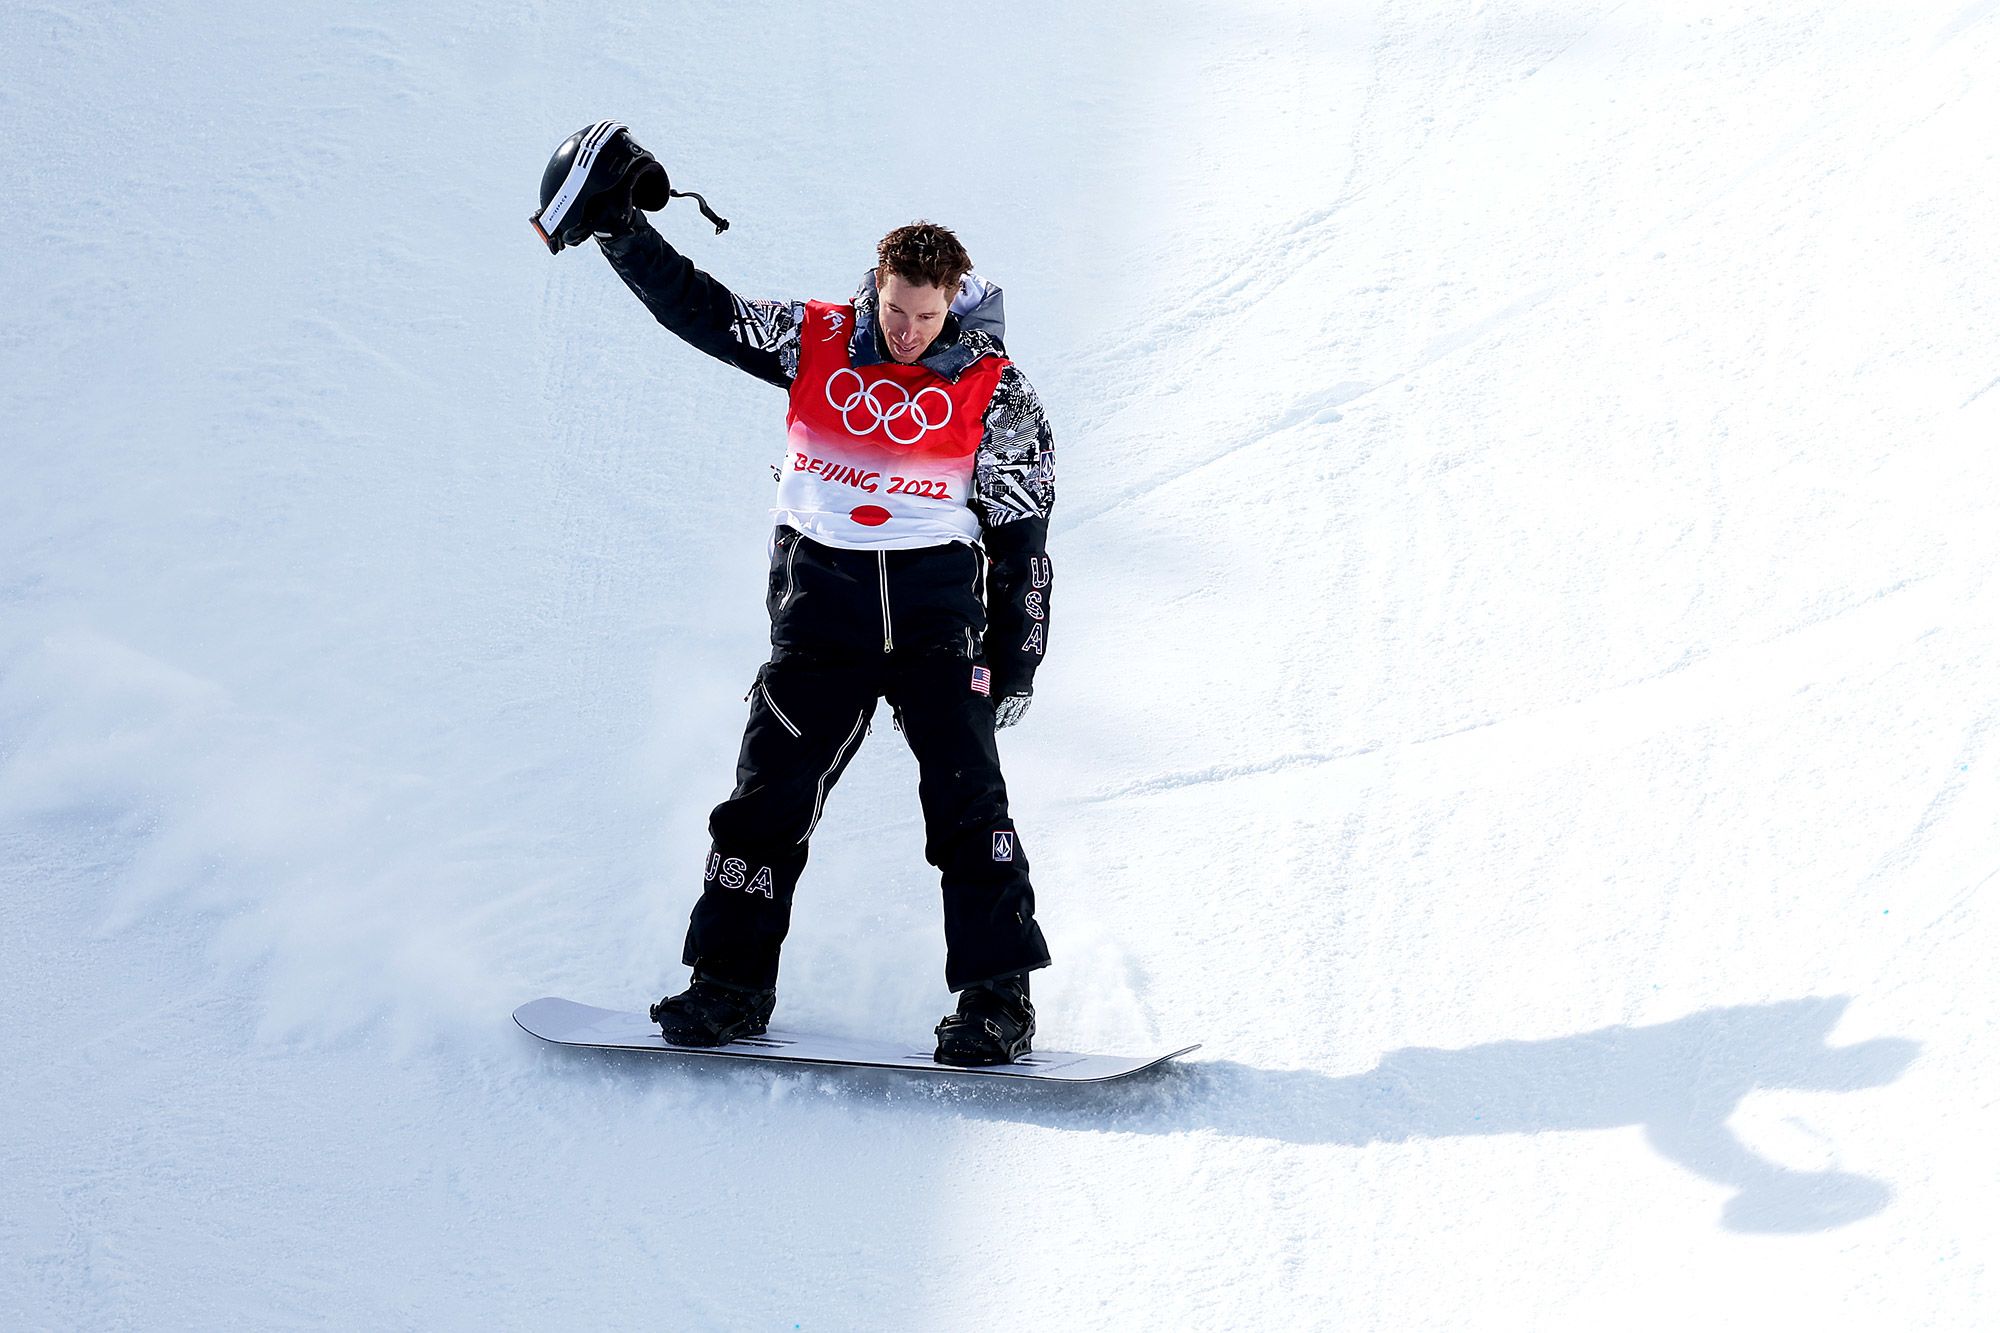 Shaun White: crashes out on final Olympic run at halfpipe | CNN